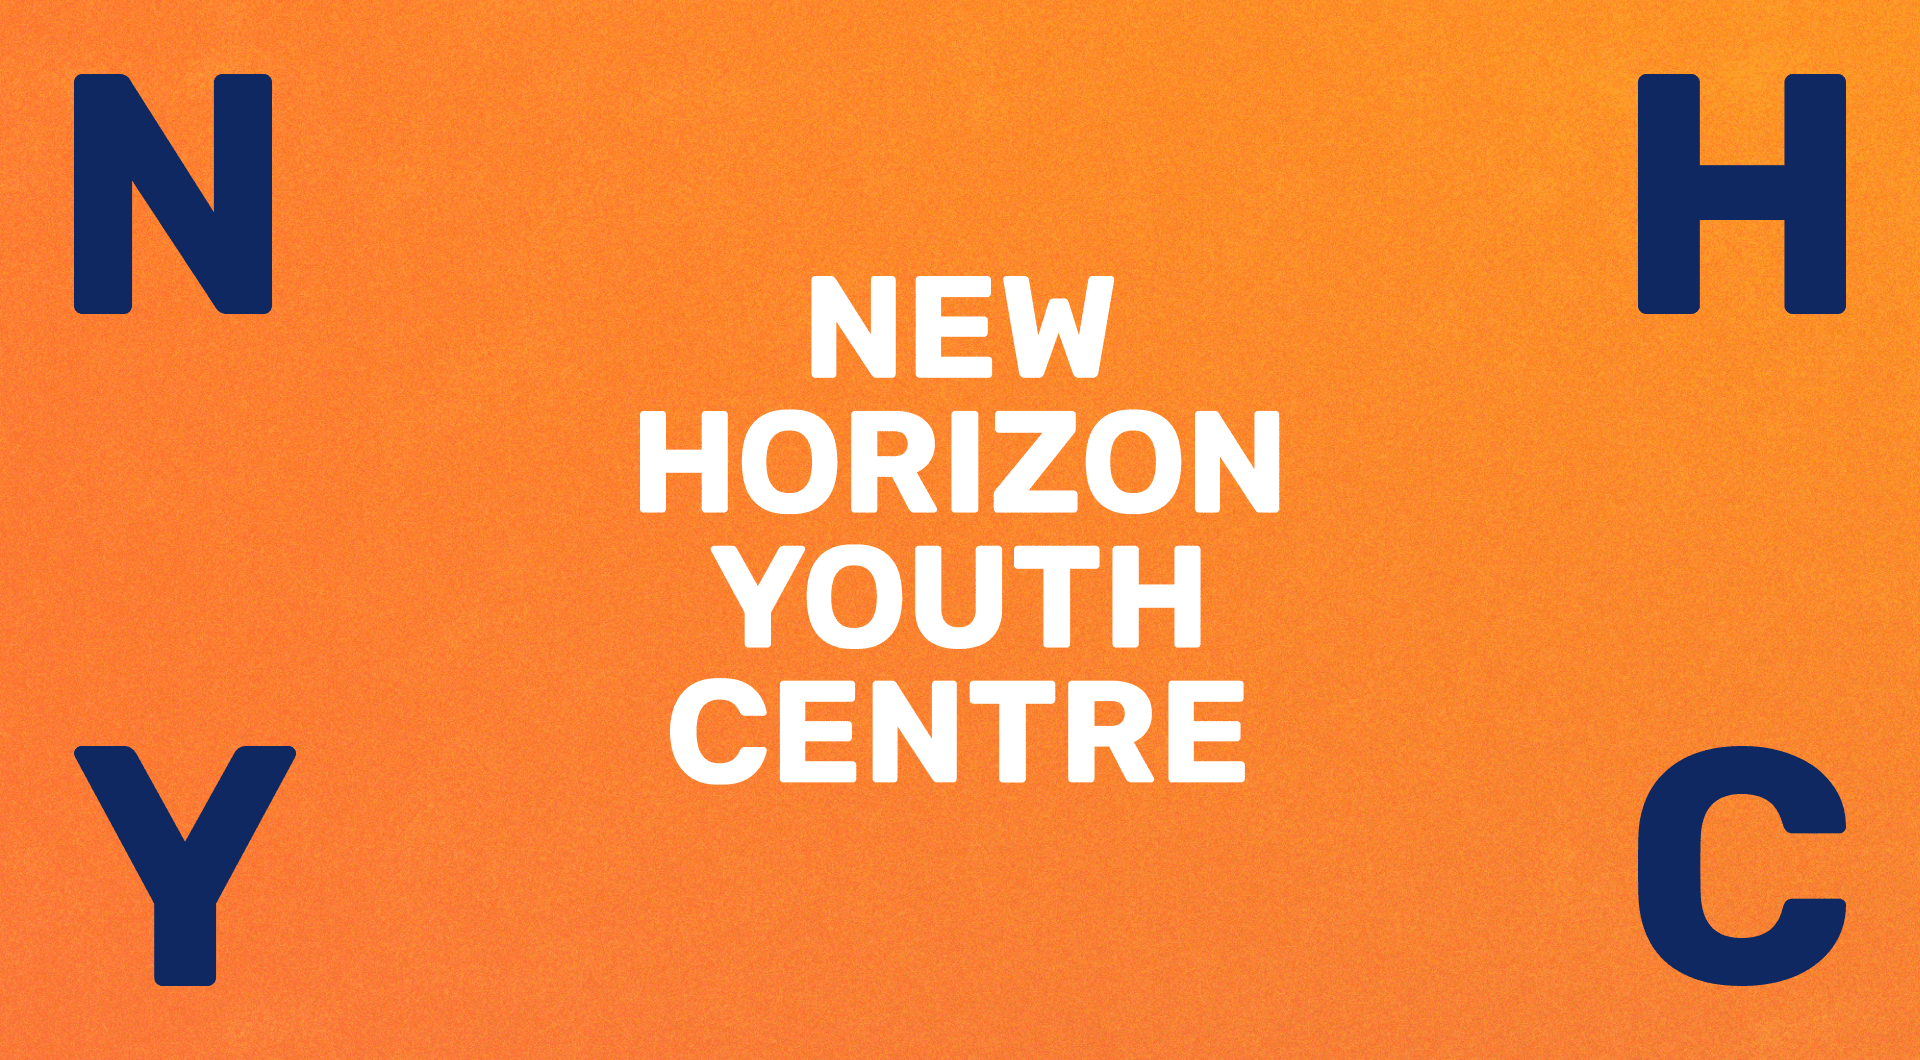 Centred white text reads 'New Horizon Youth Centre' on an orange background with navy blue letters N H Y C in the corners